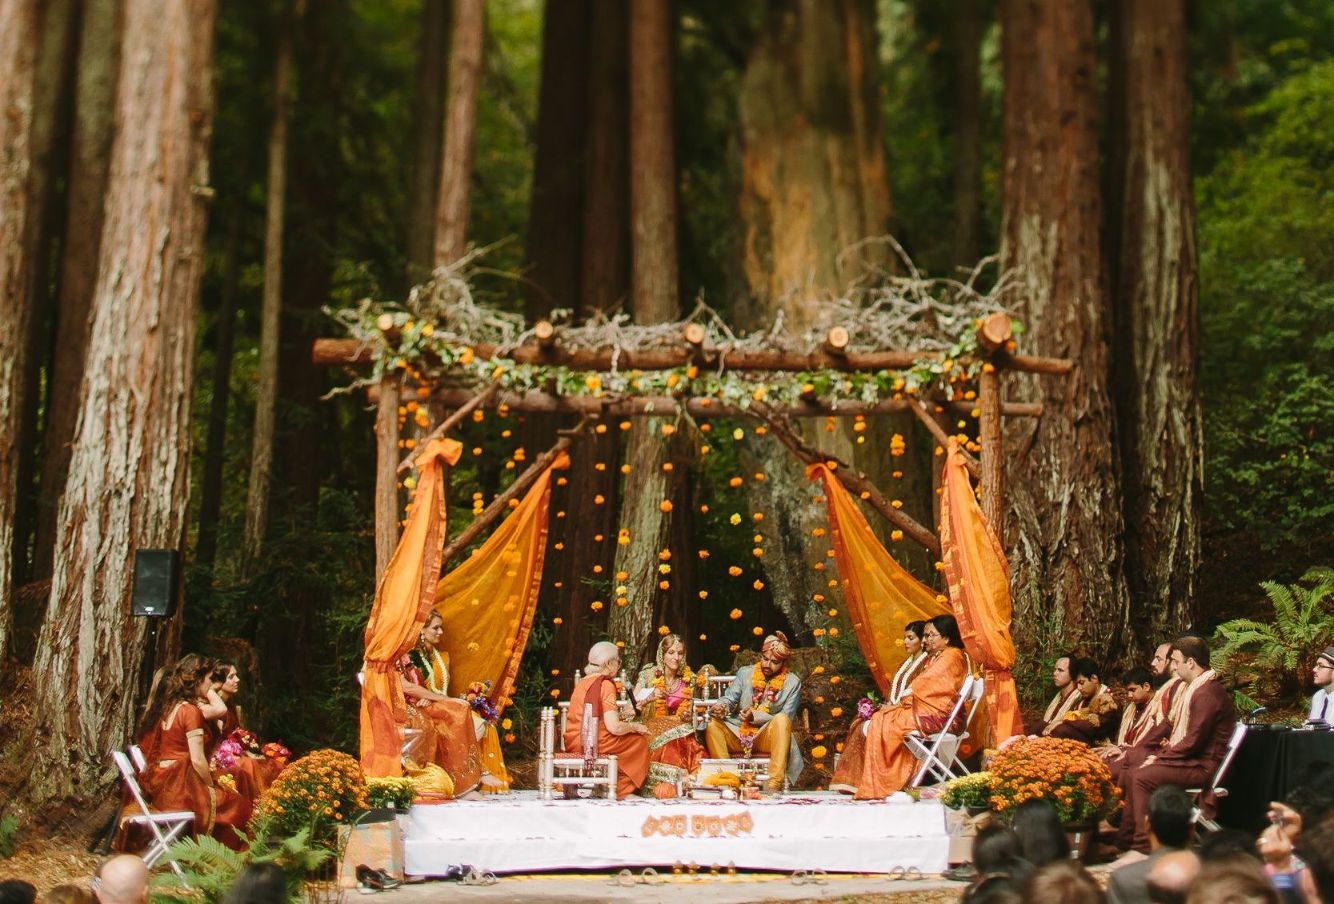 Indian wedding decor - in the woods